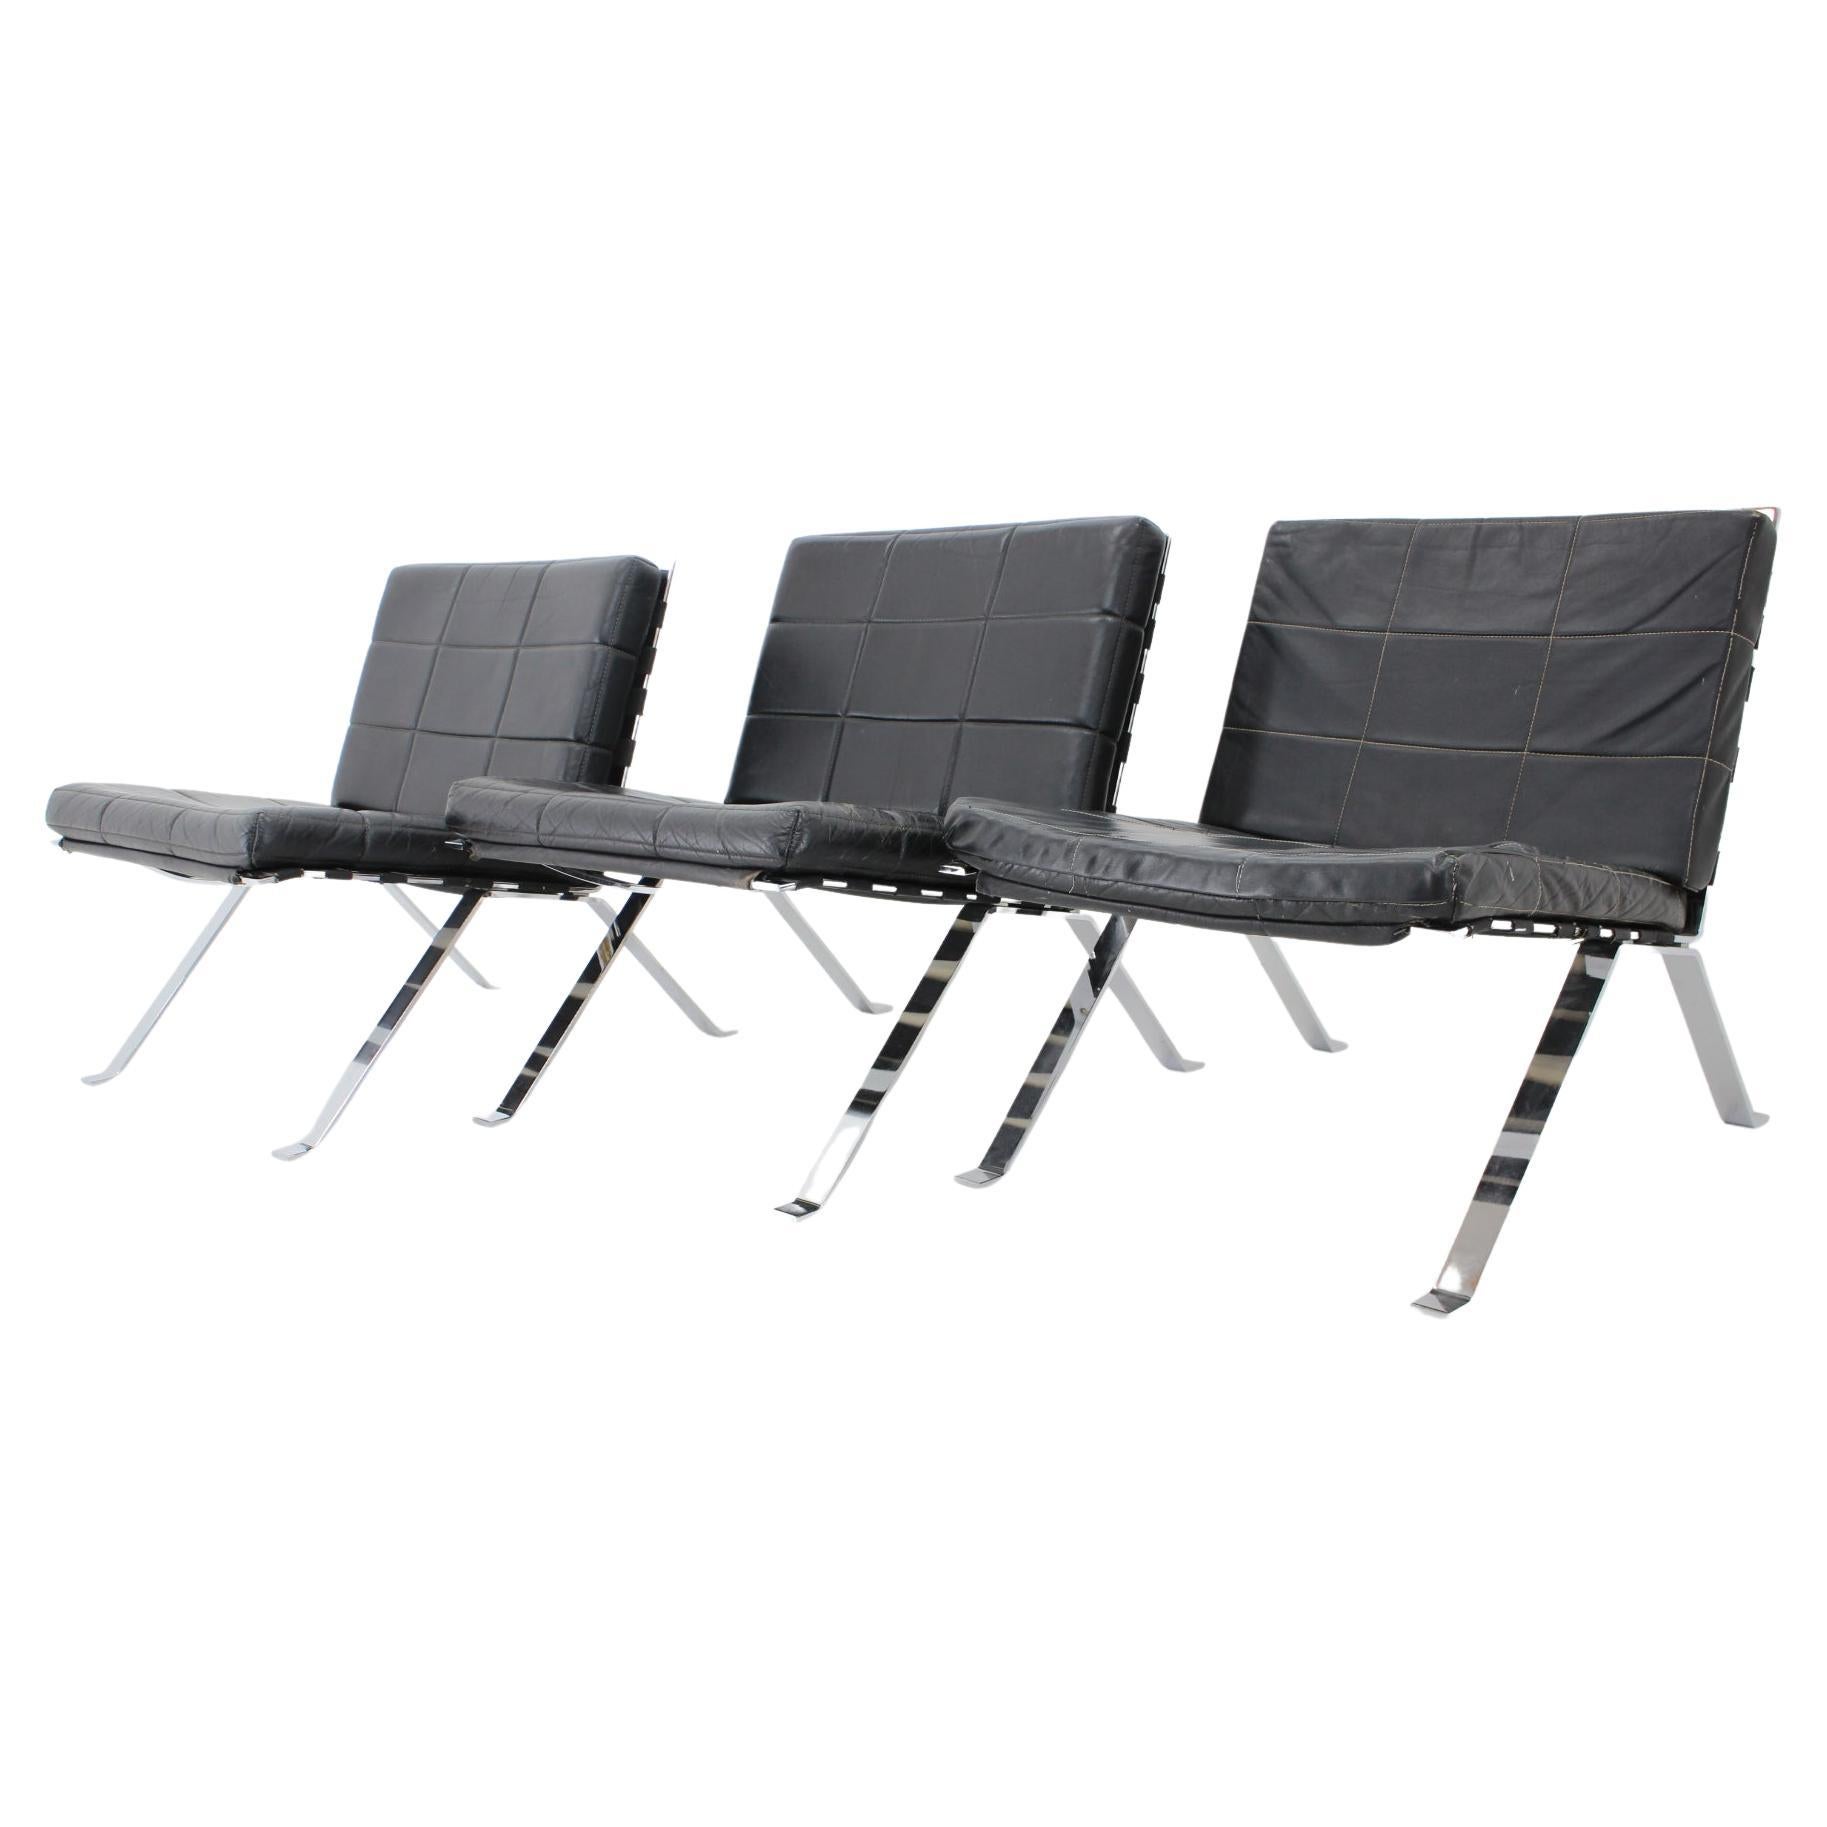 Mid-Century Modern Set of 3 Hans Eichenberger, Girsberger Leather Lounge Chairs, Switzerland 1966 For Sale